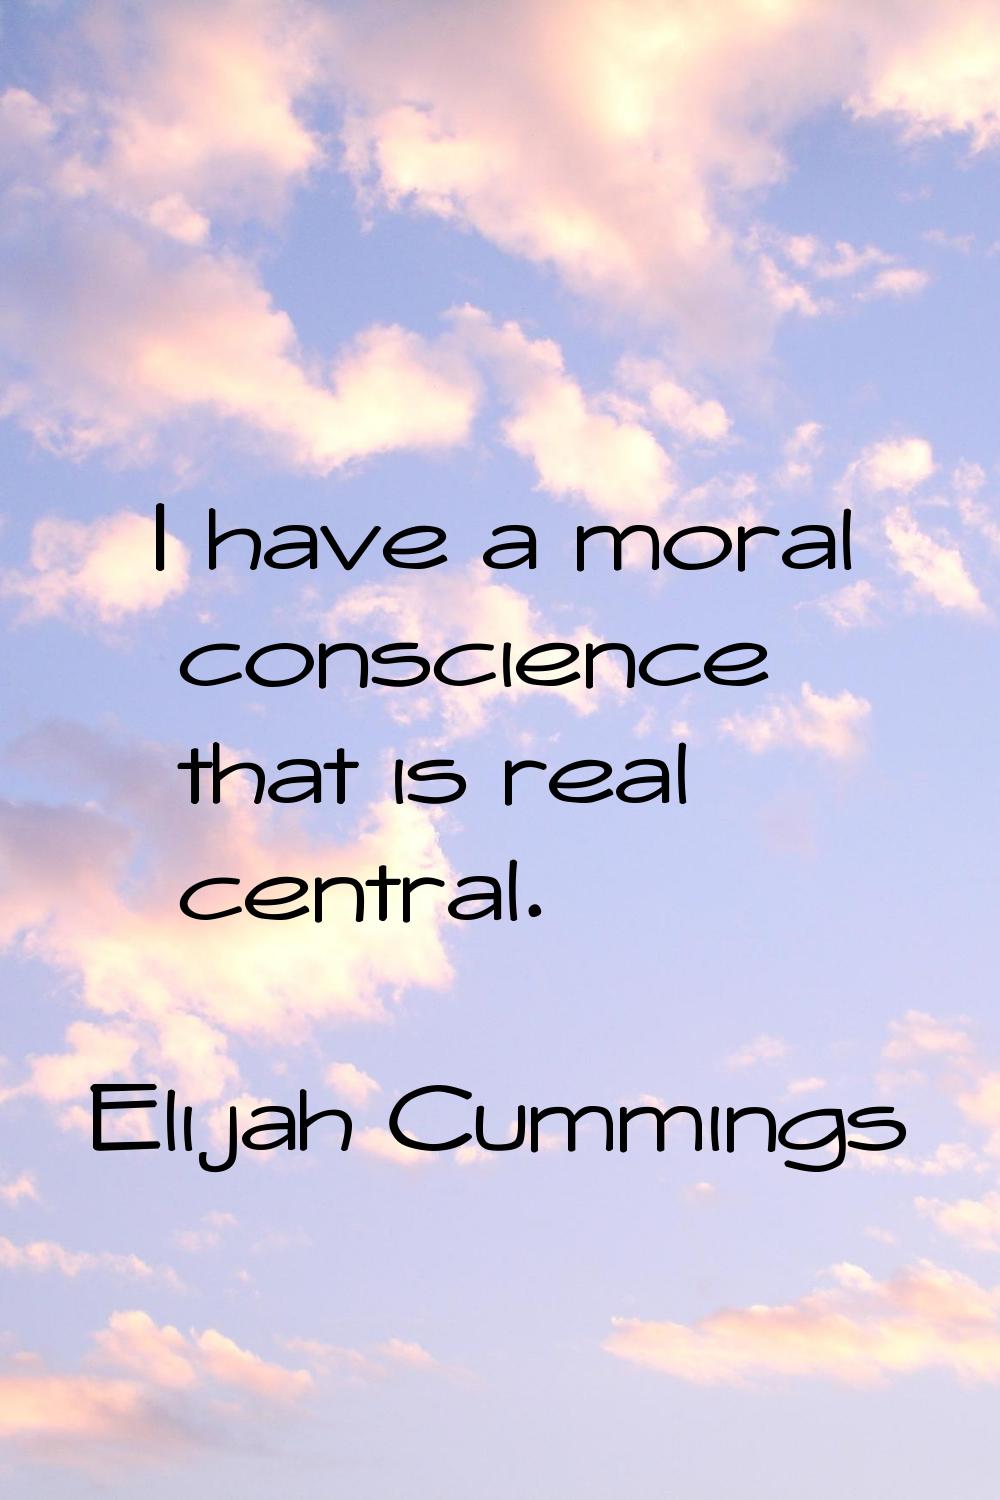 I have a moral conscience that is real central.